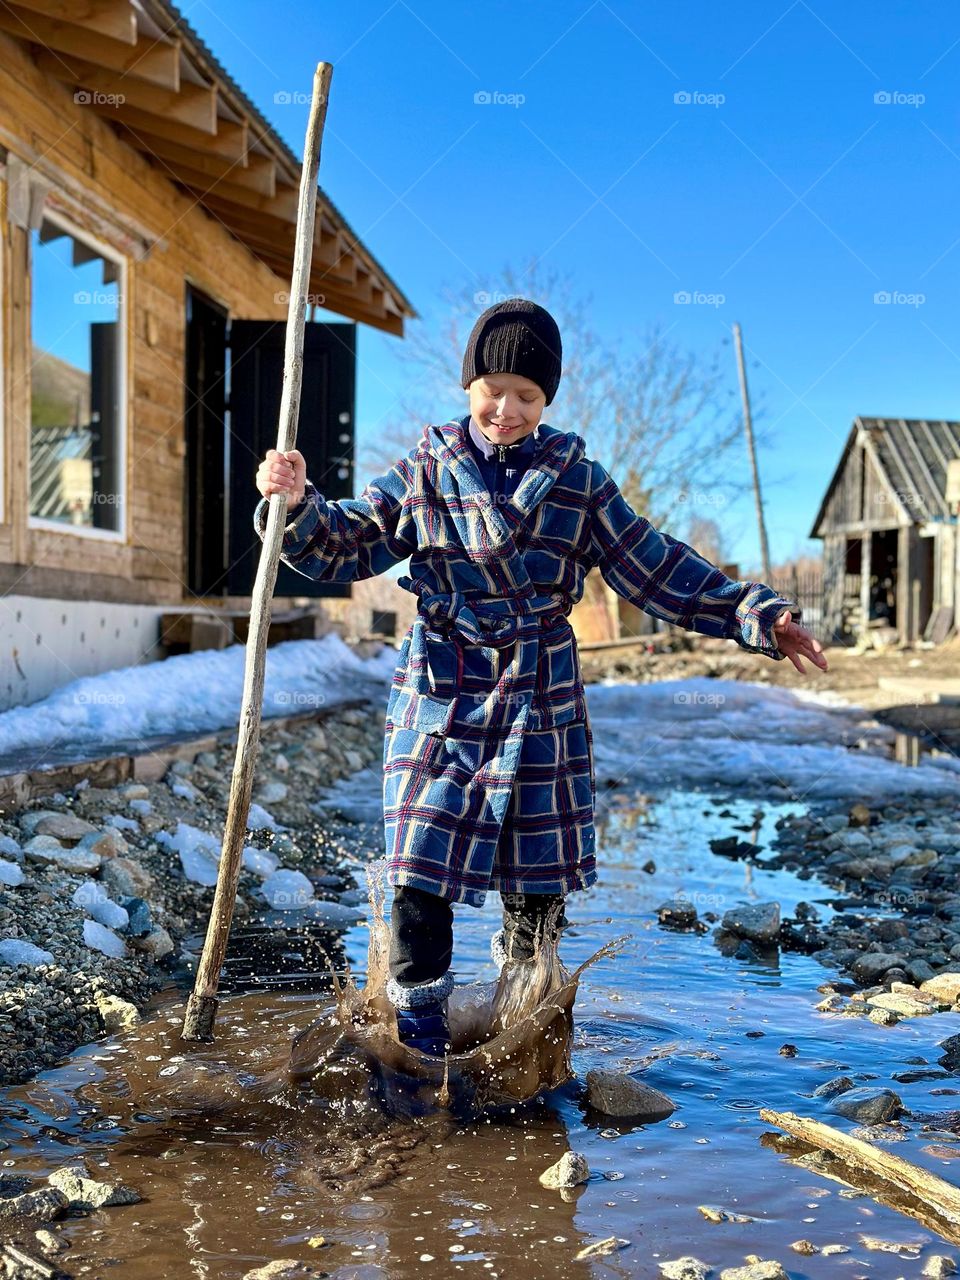 Battle: winter and spring. Boy stomping in a puddle